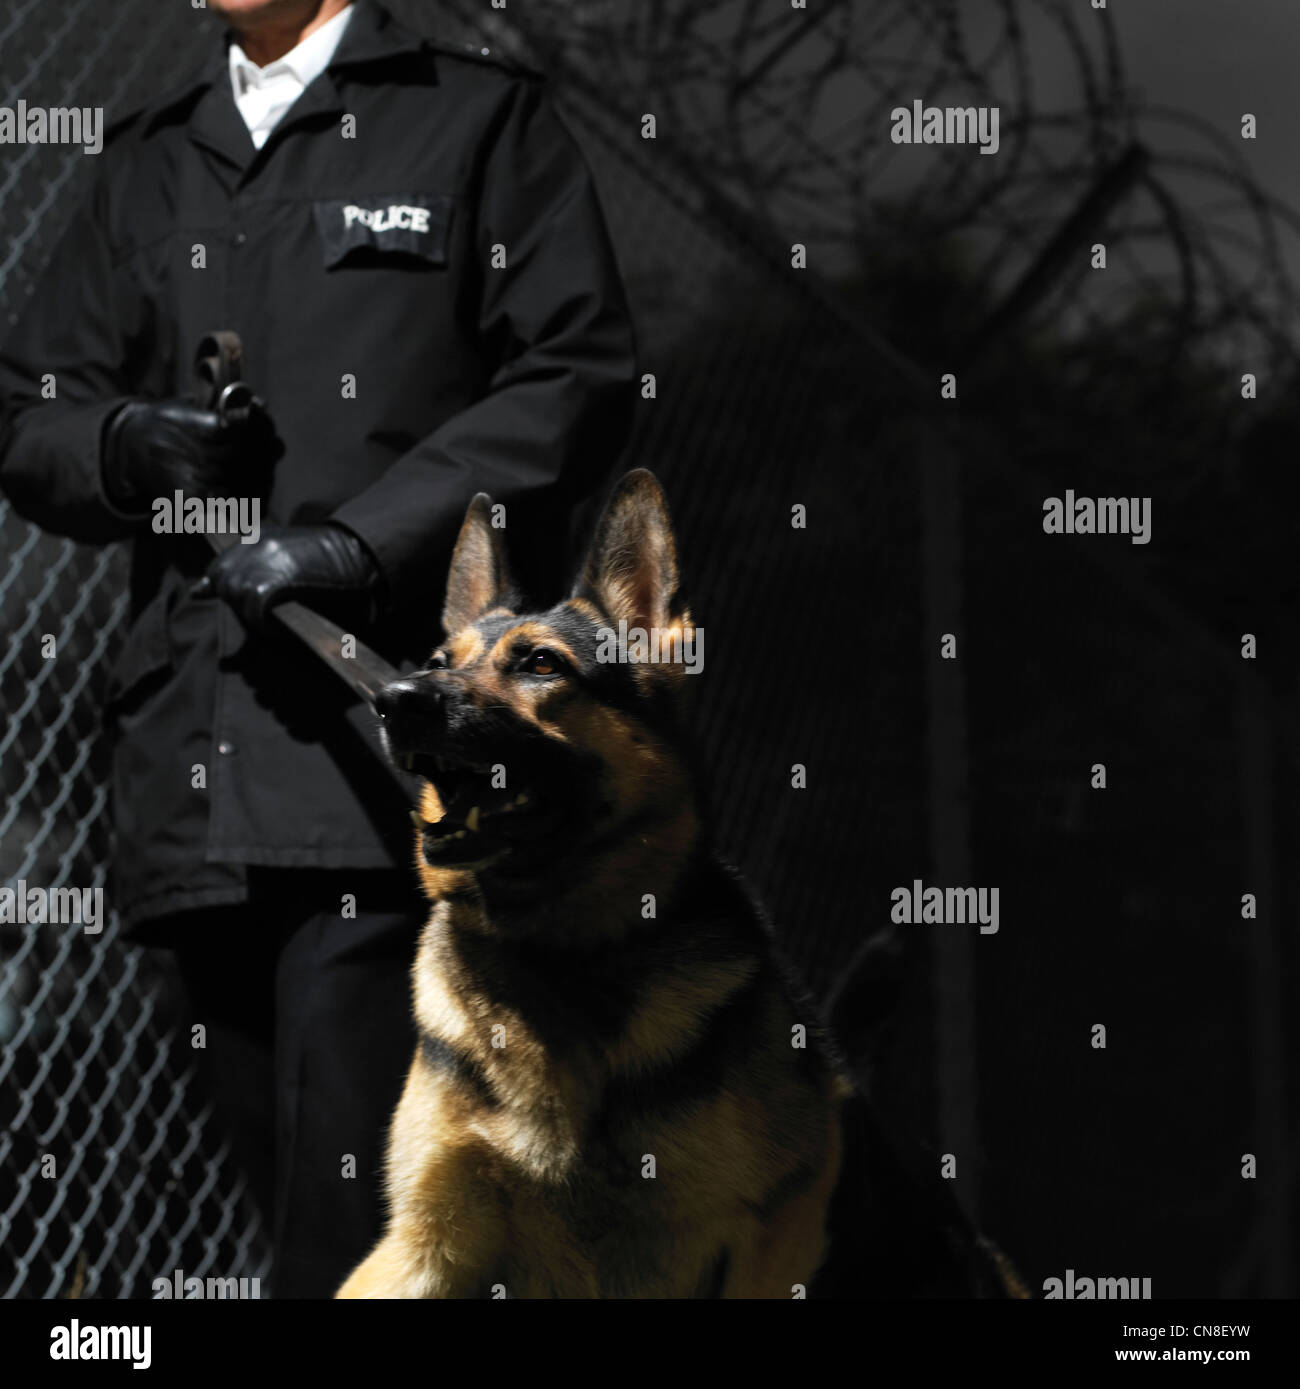 Police guard dog with handler Stock Photo